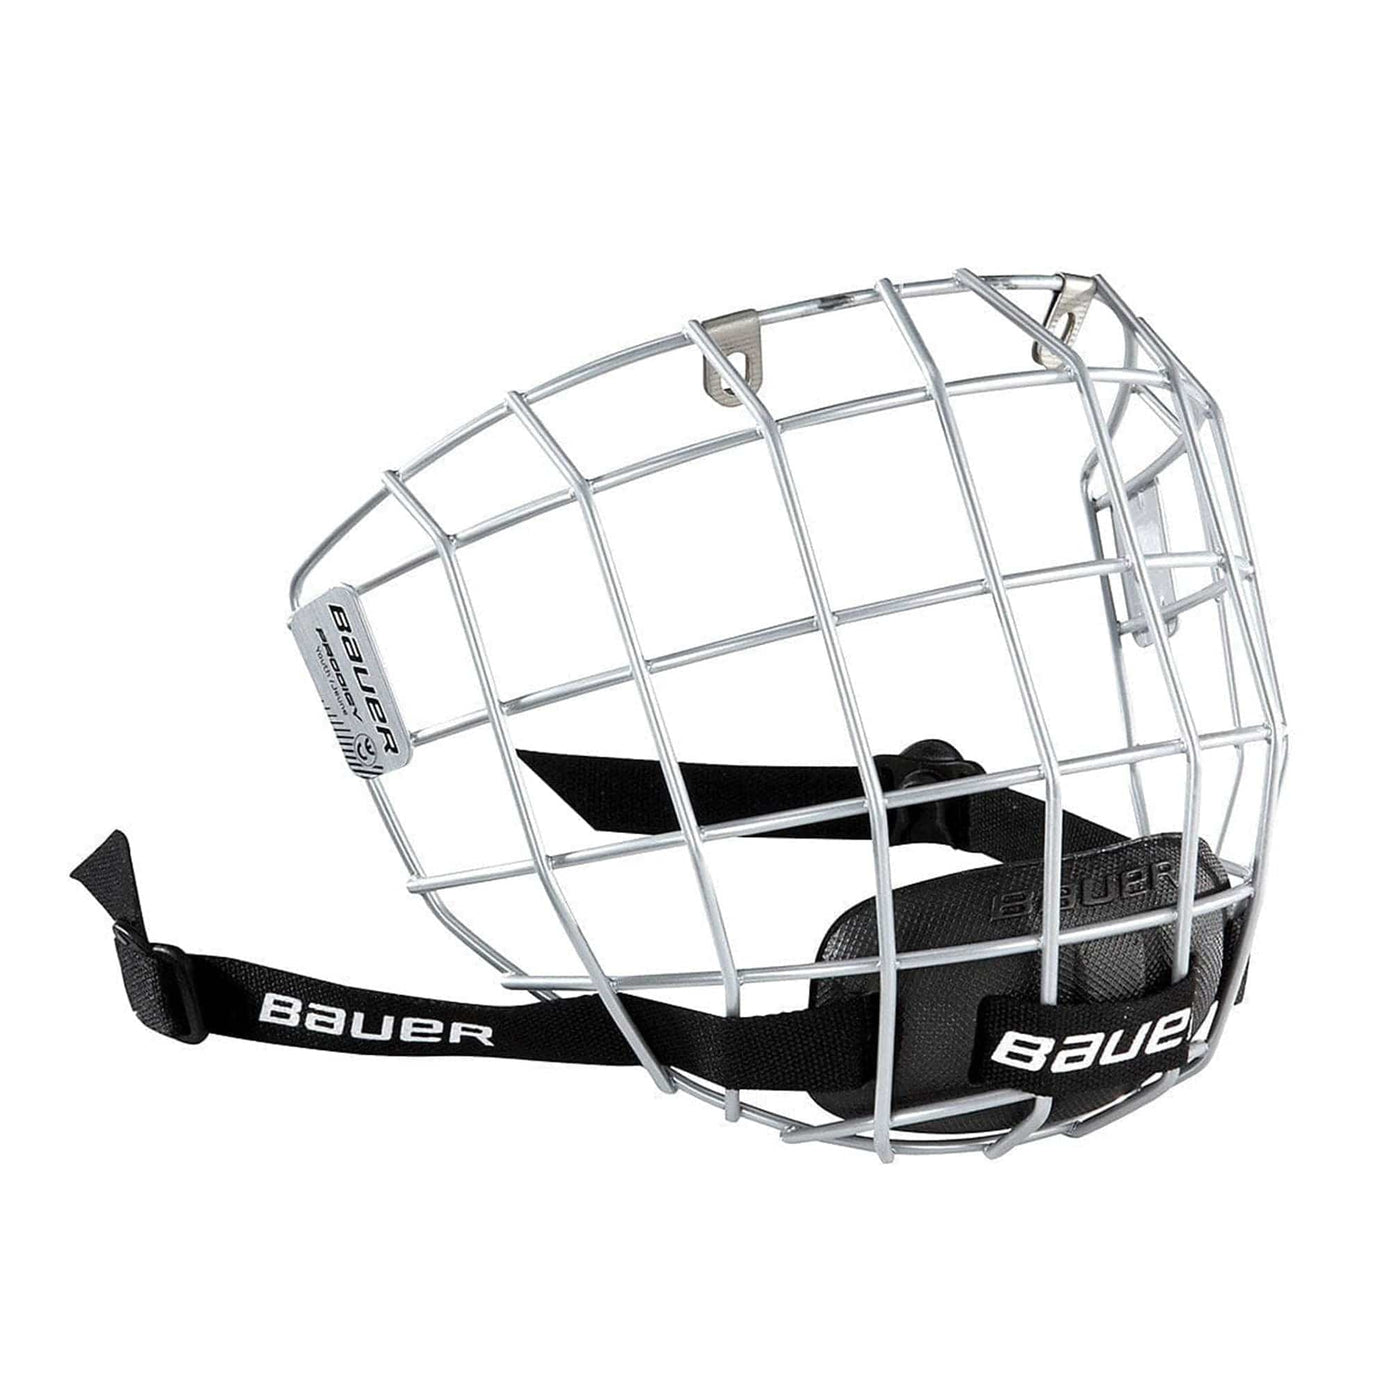 Bauer Prodigy Youth Hockey Cage - The Hockey Shop Source For Sports